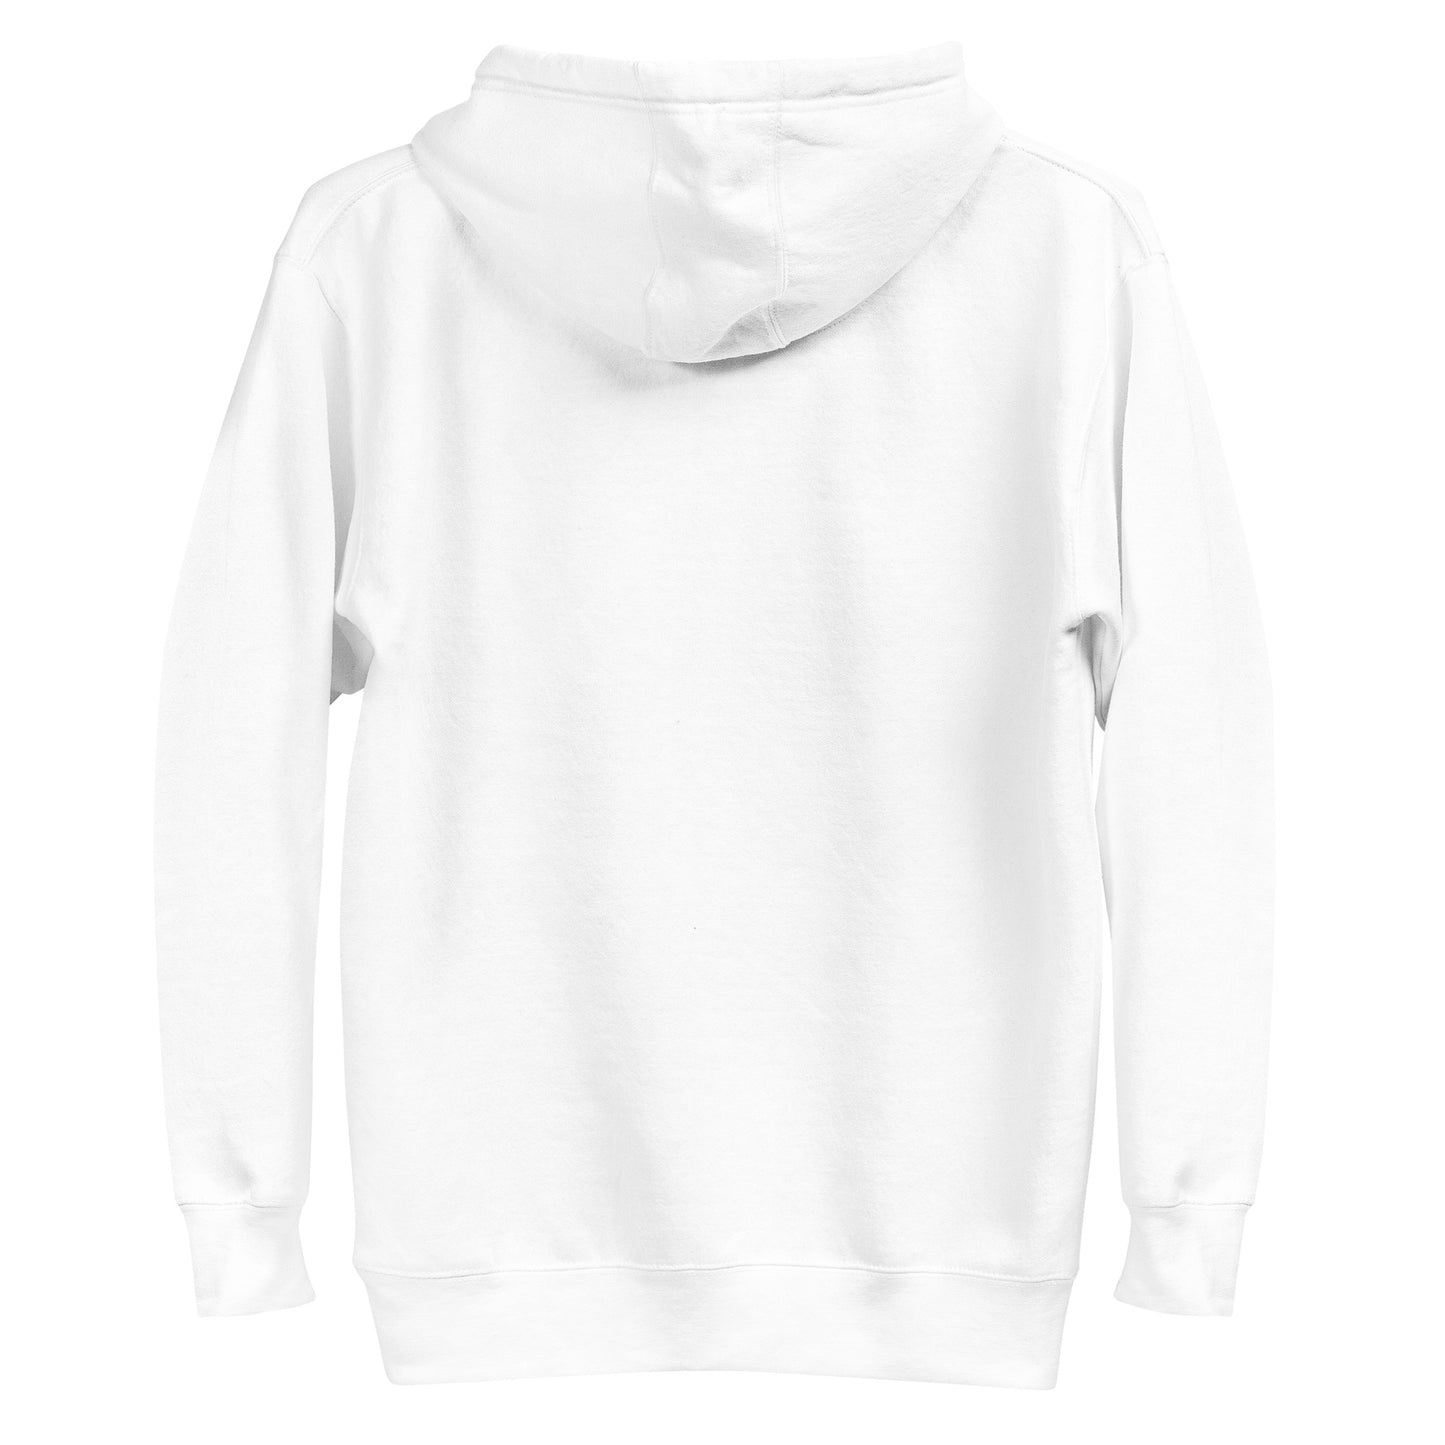 SVOLTA Pixel Bolt Embroidered Unisex Hoodie in White, XS-XL - Adult